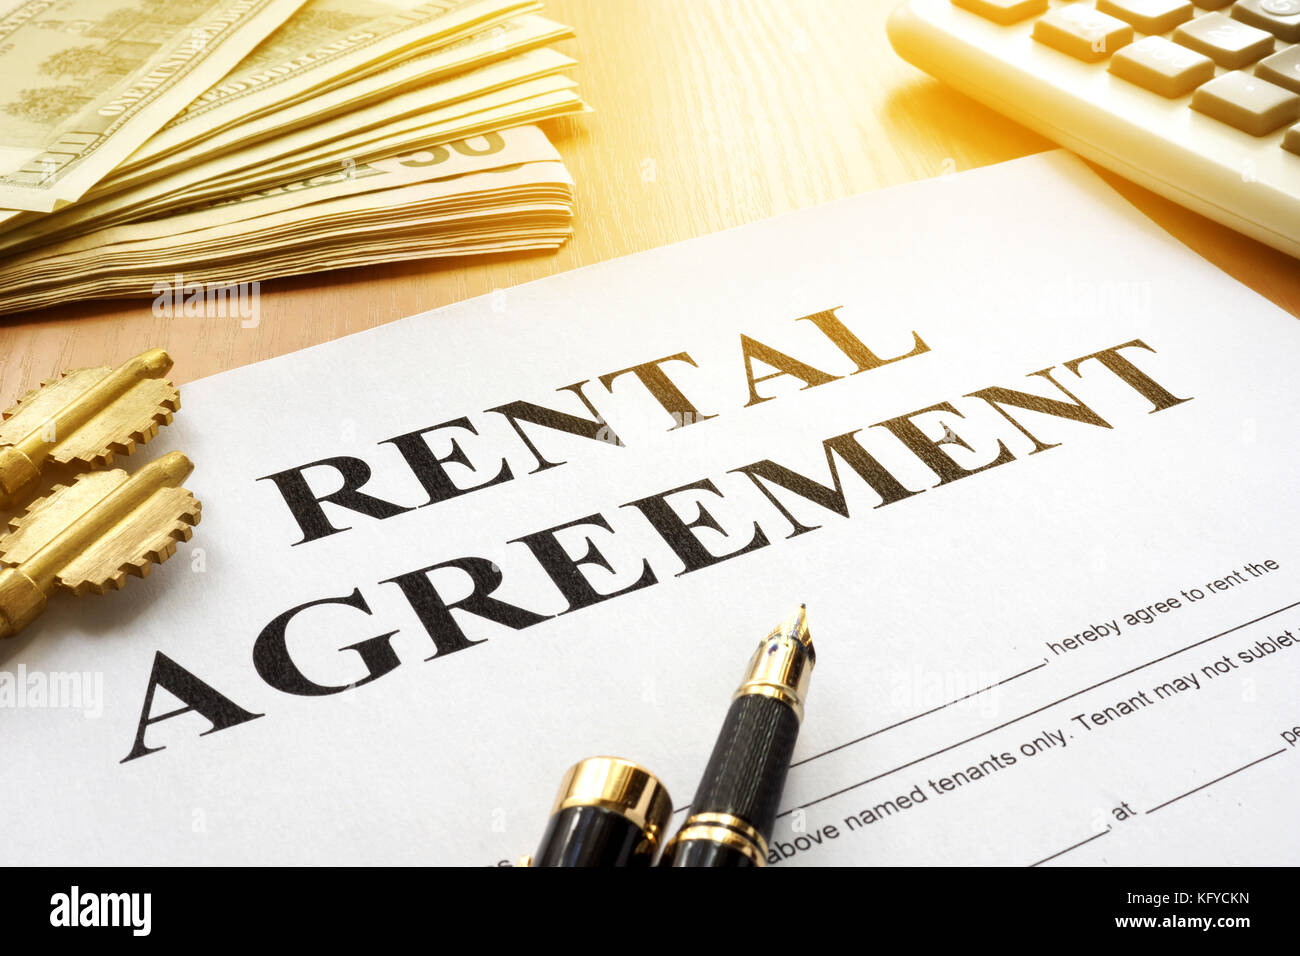 Rental agreement on an office table. Stock Photo